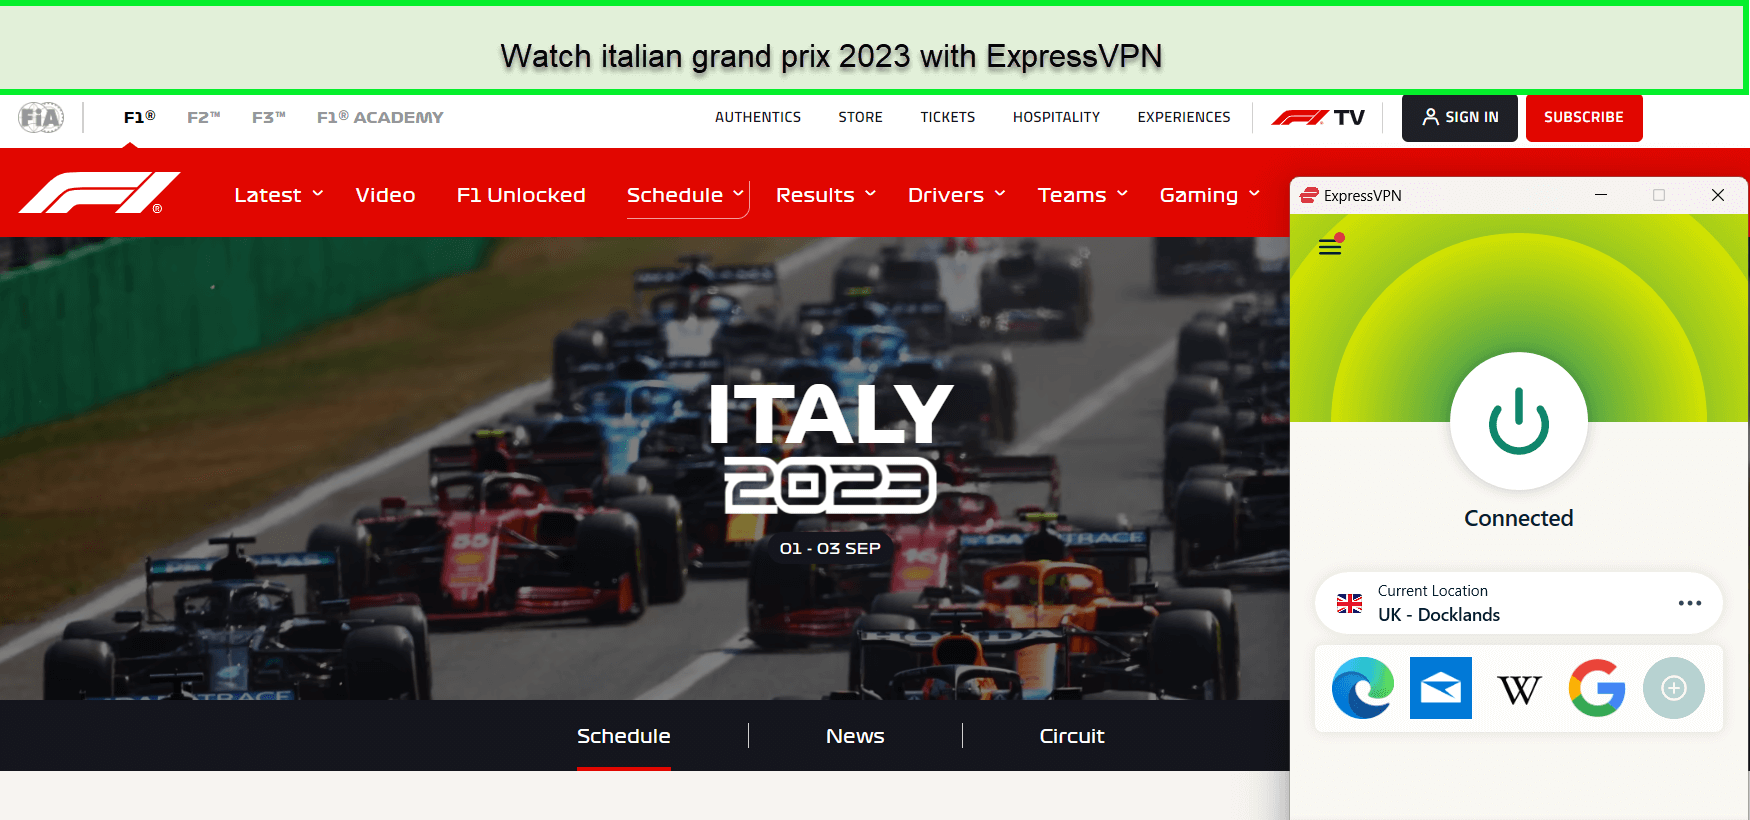 How-to-Watch-Italian-Grand-Prix-2023-in-Germany-on-ITV-with-ExpressVPN